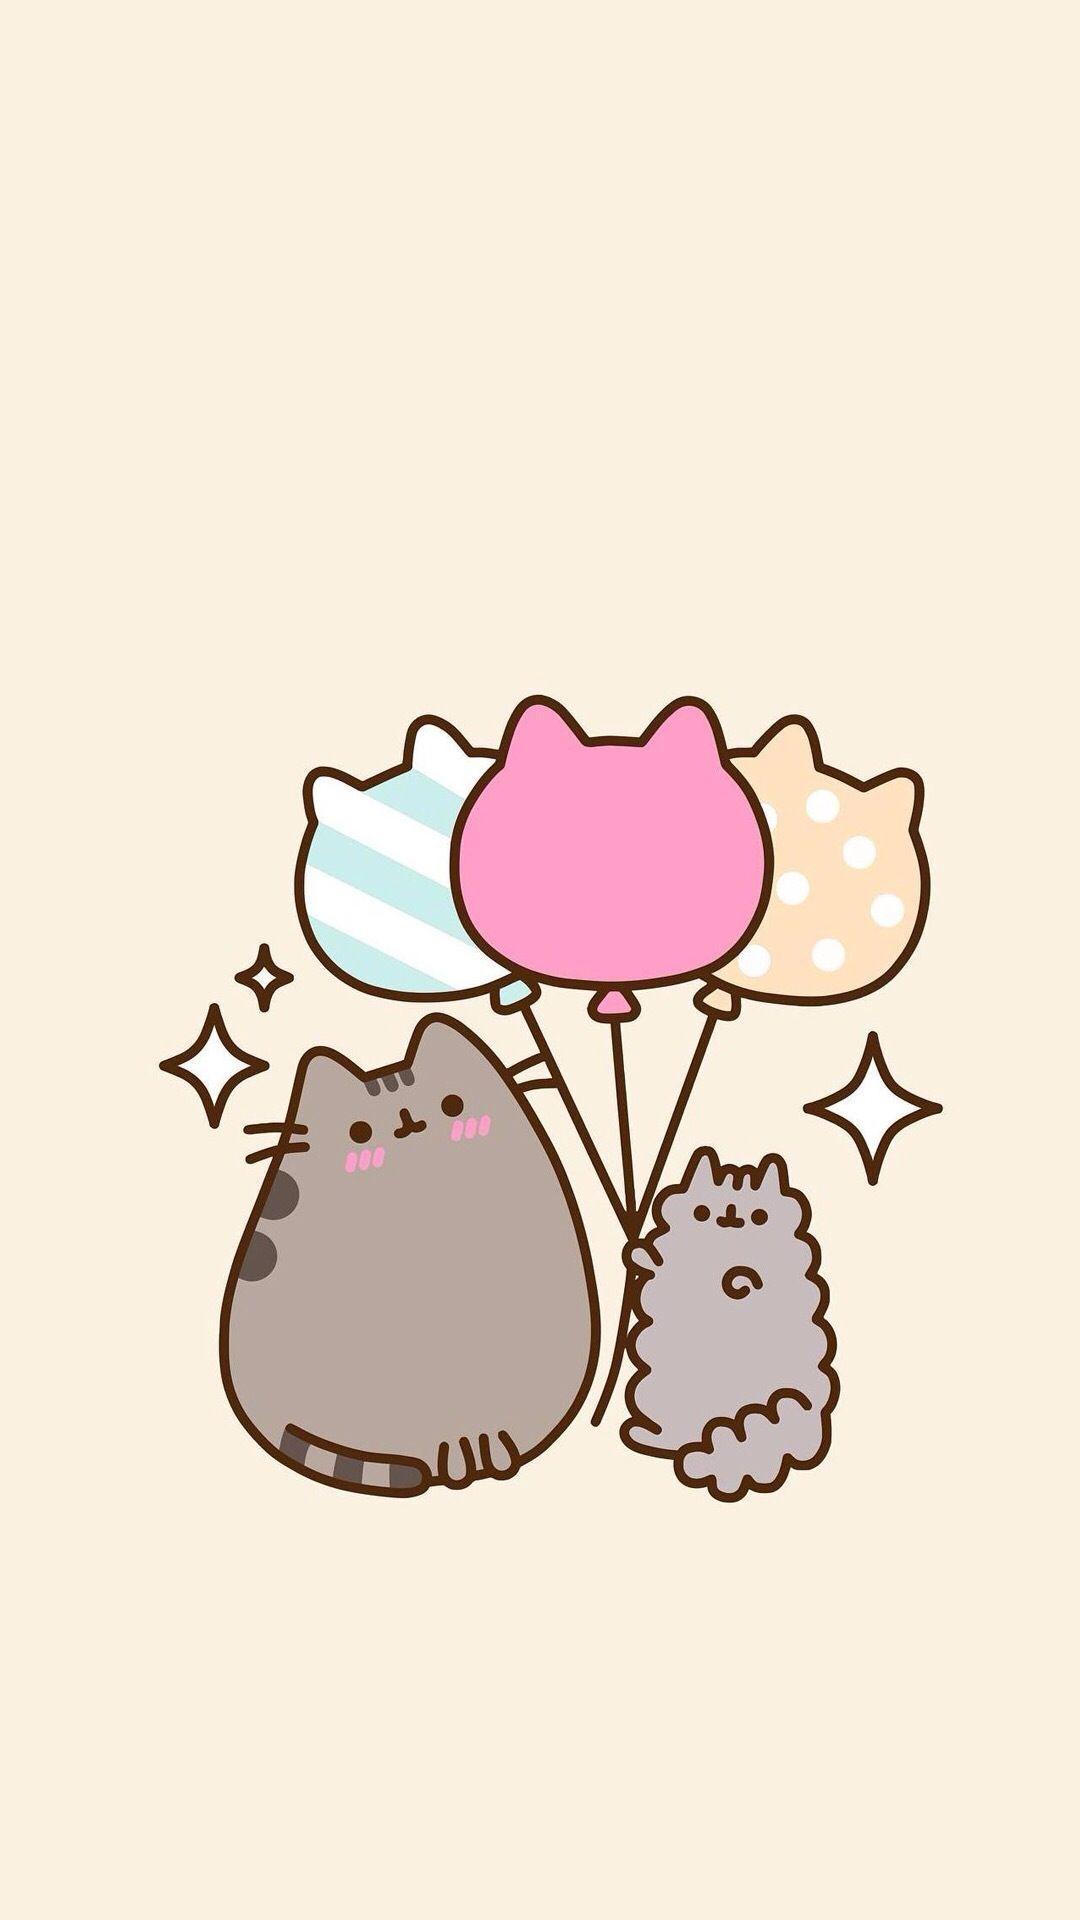 This wallpaper is the cutest! You gotta agree with me. Pusheen